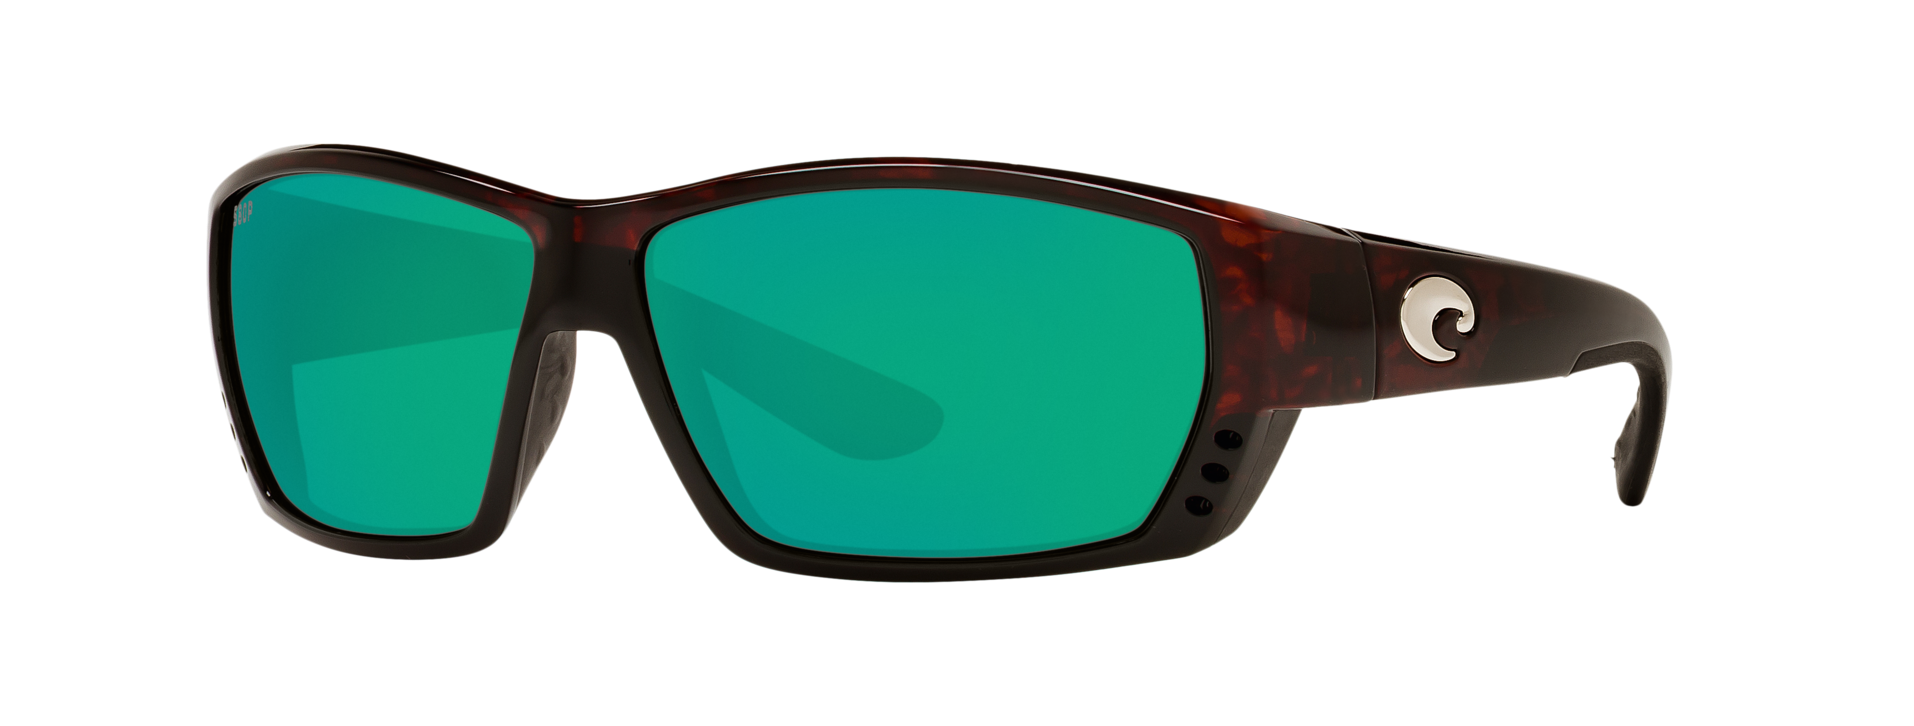 Best Polarized Fishing Sunglasses with Readers of 2021 | SportRx